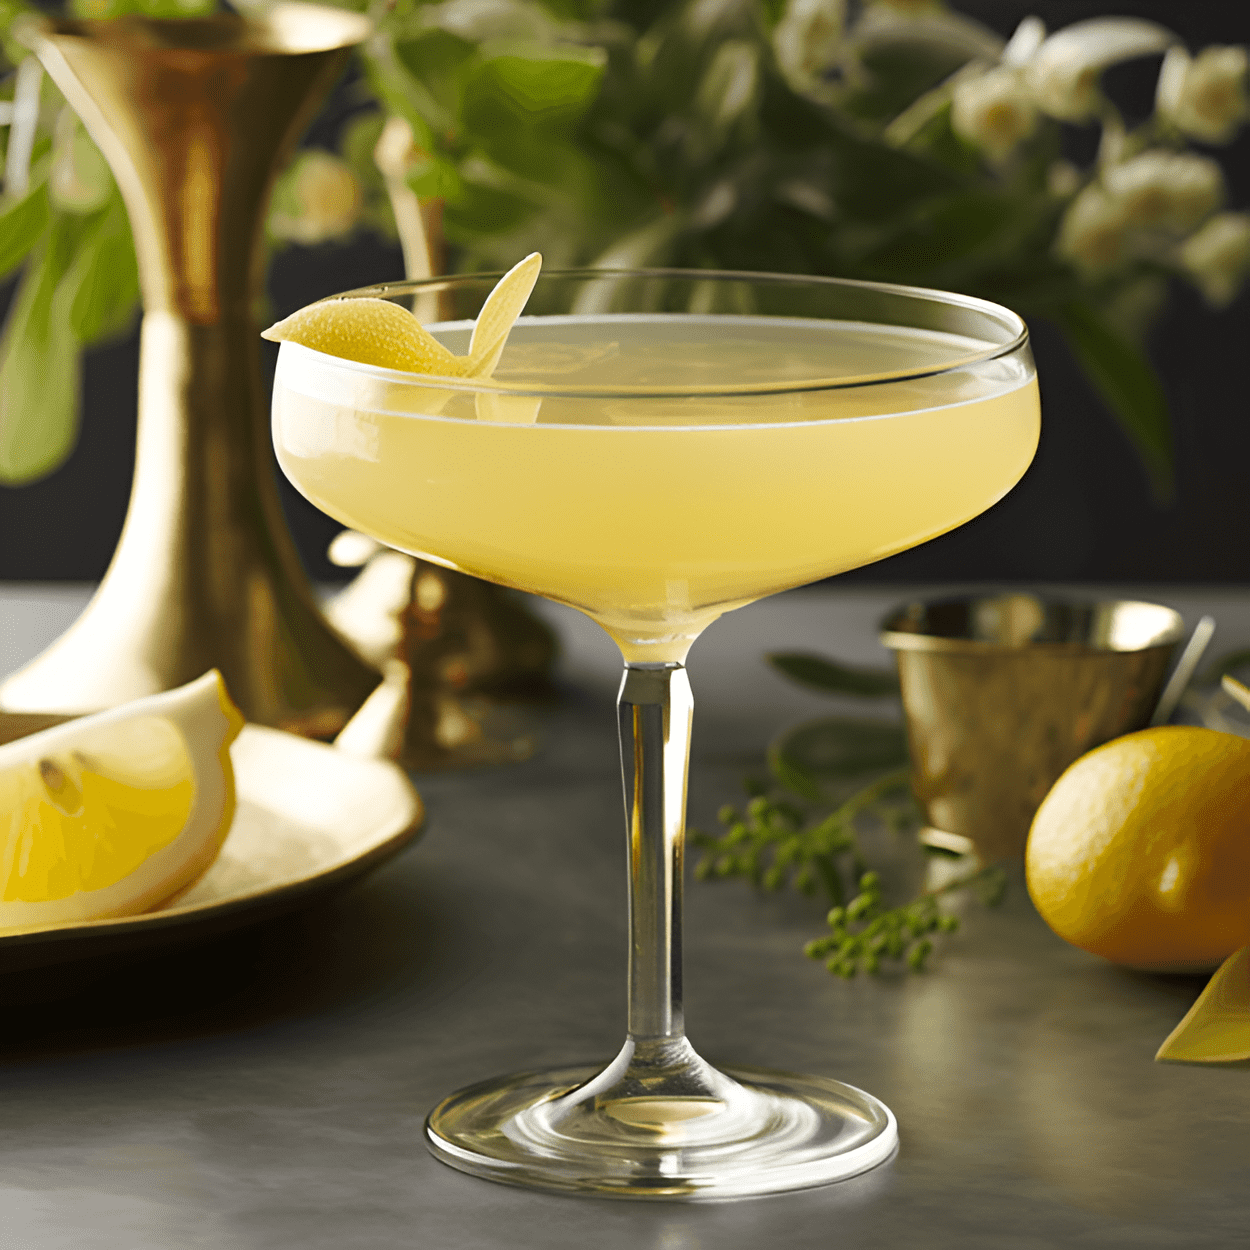 Army Navy Cocktail Recipe - The Army Navy cocktail is a delightful balance of sweet and sour, with a hint of almond flavor. The gin provides a strong, juniper-forward base, while the lemon juice adds a refreshing tartness. The orgeat syrup brings a subtle sweetness and nutty undertone to the mix.